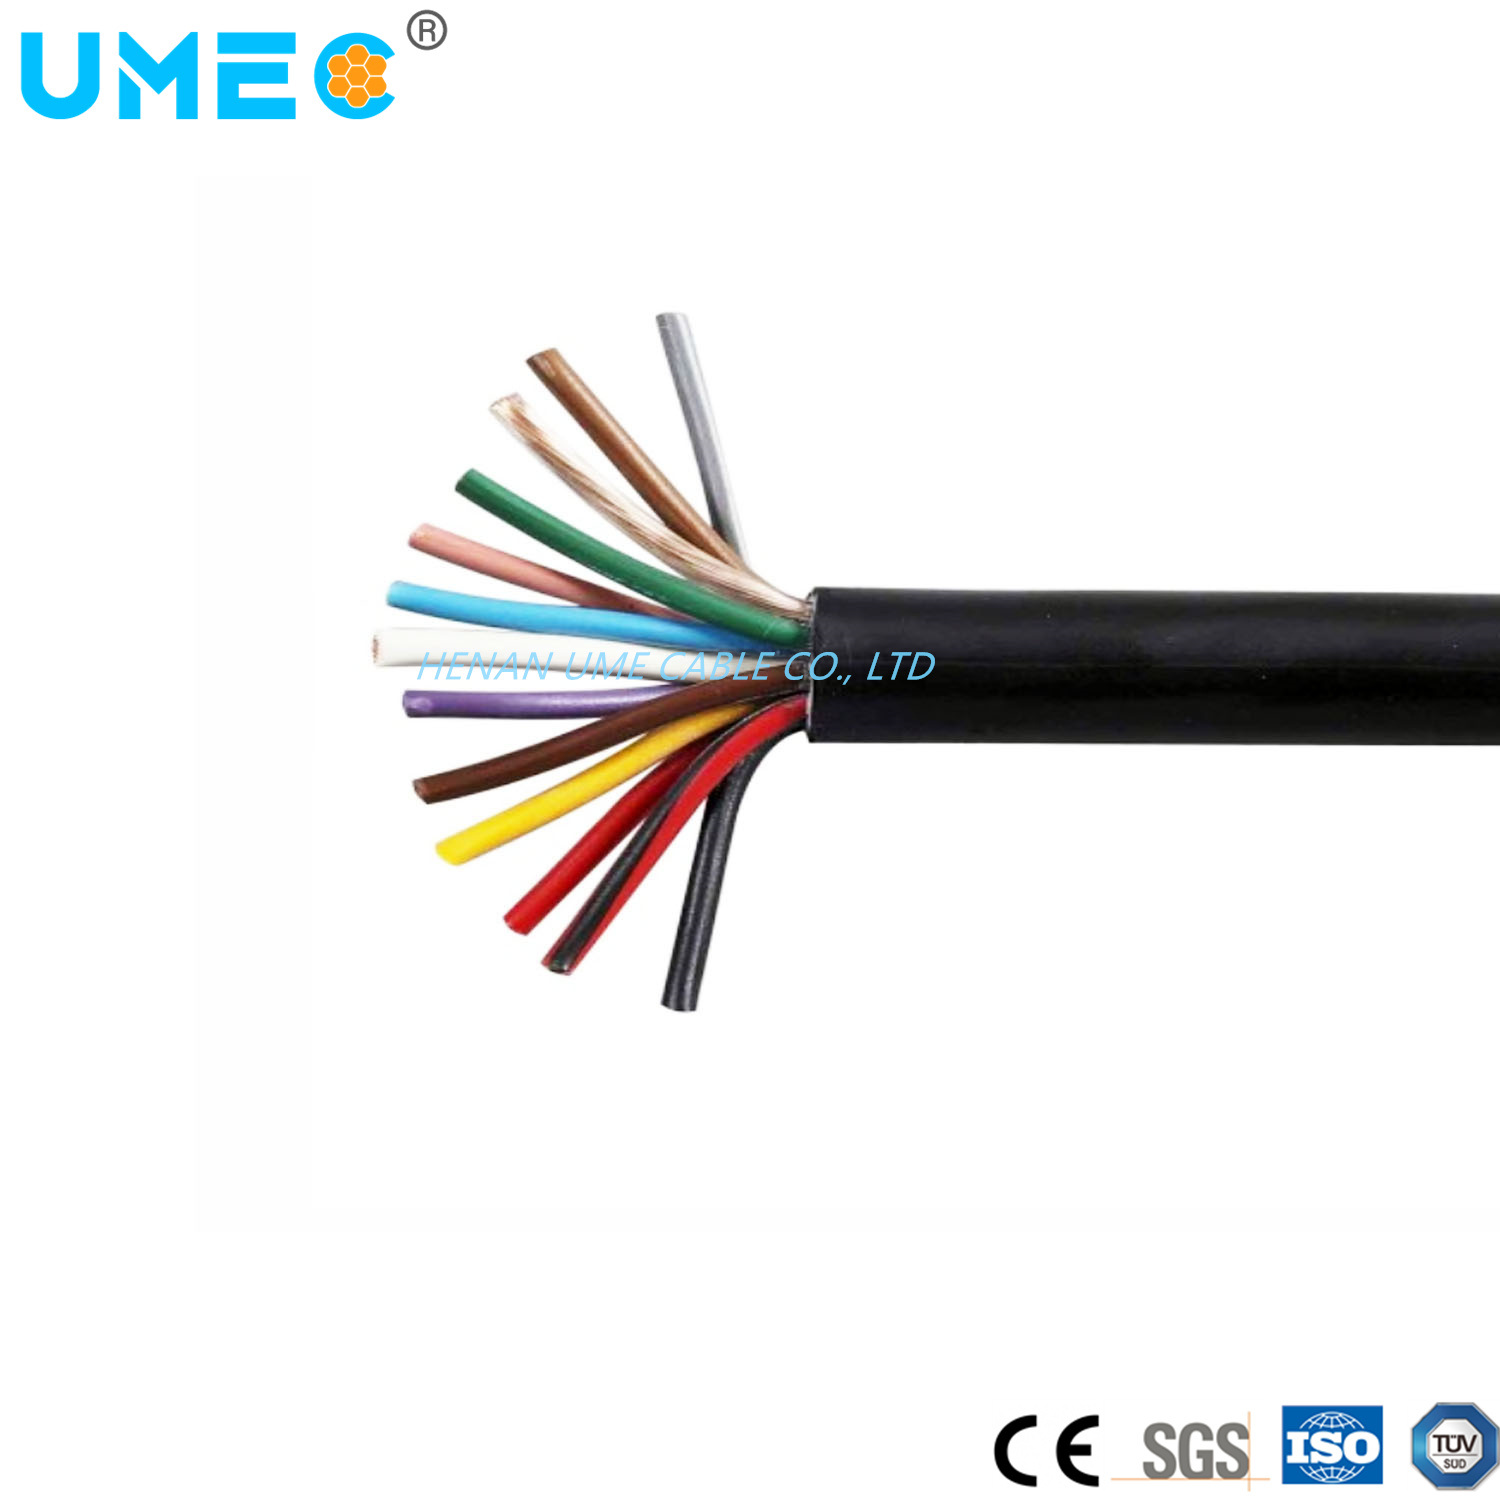 Made in China Low Voltage 300/500V 450/750V Rubber Insulated High-Temperature Multicore Silicone Rubber Wire Cable